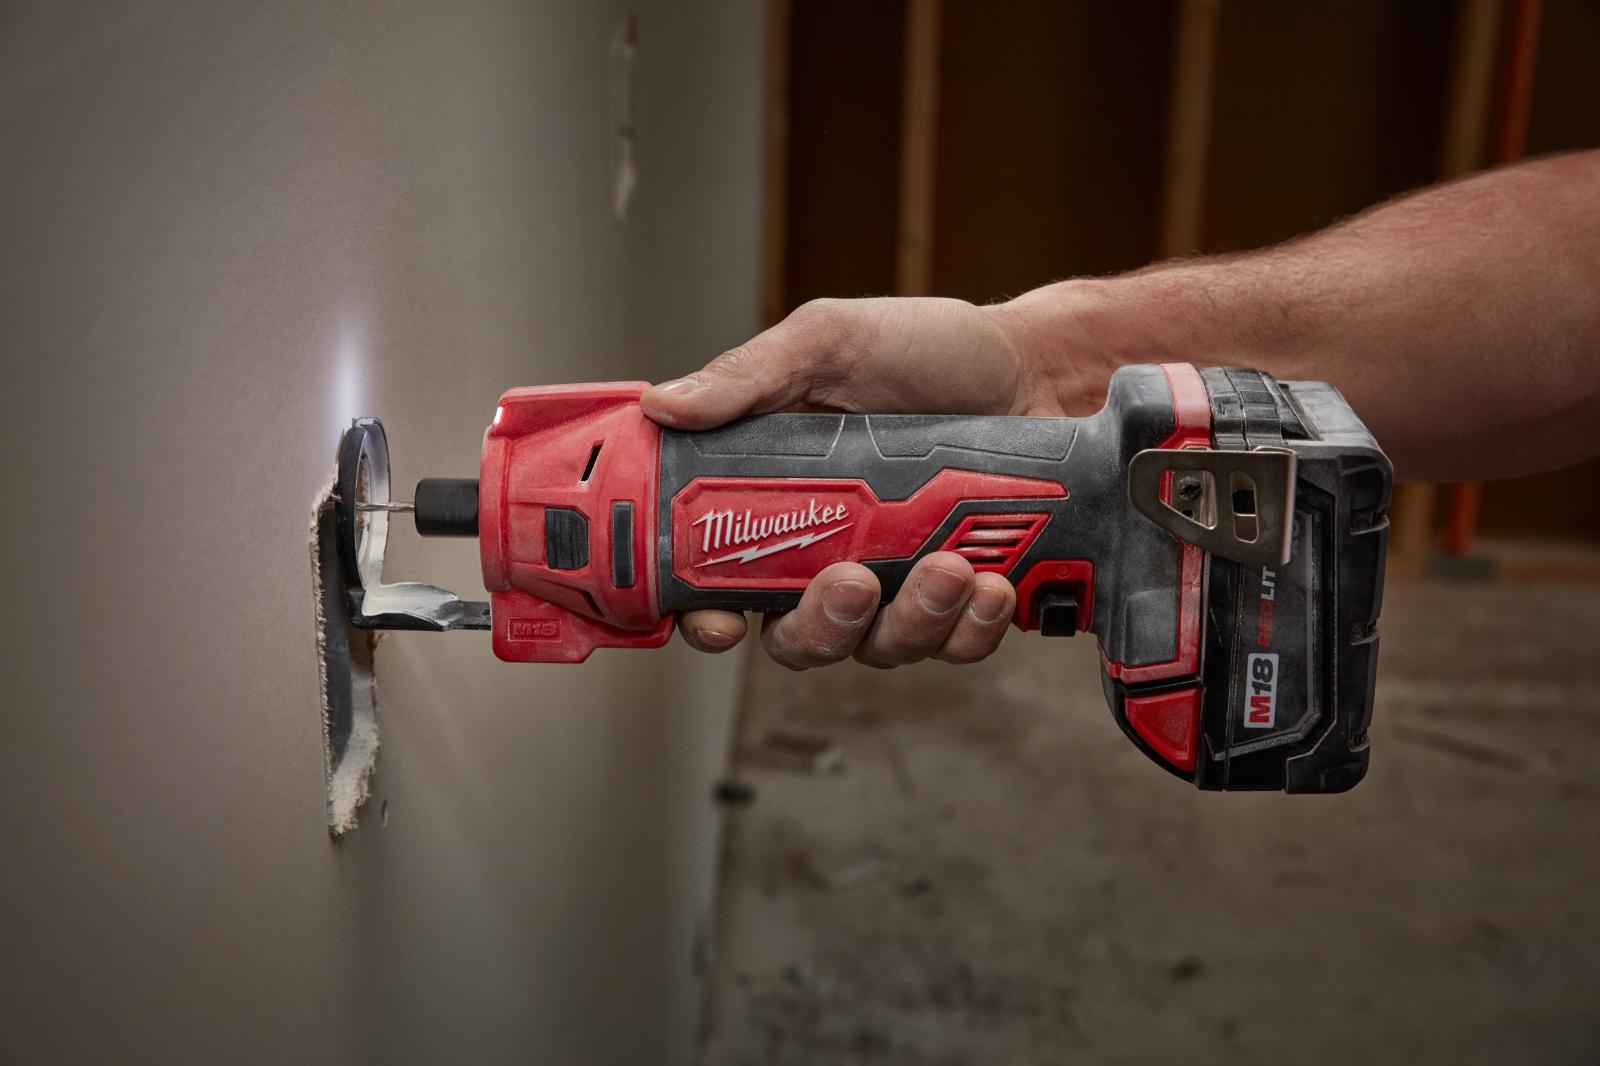 Milwaukee M18 Cut Out Tool